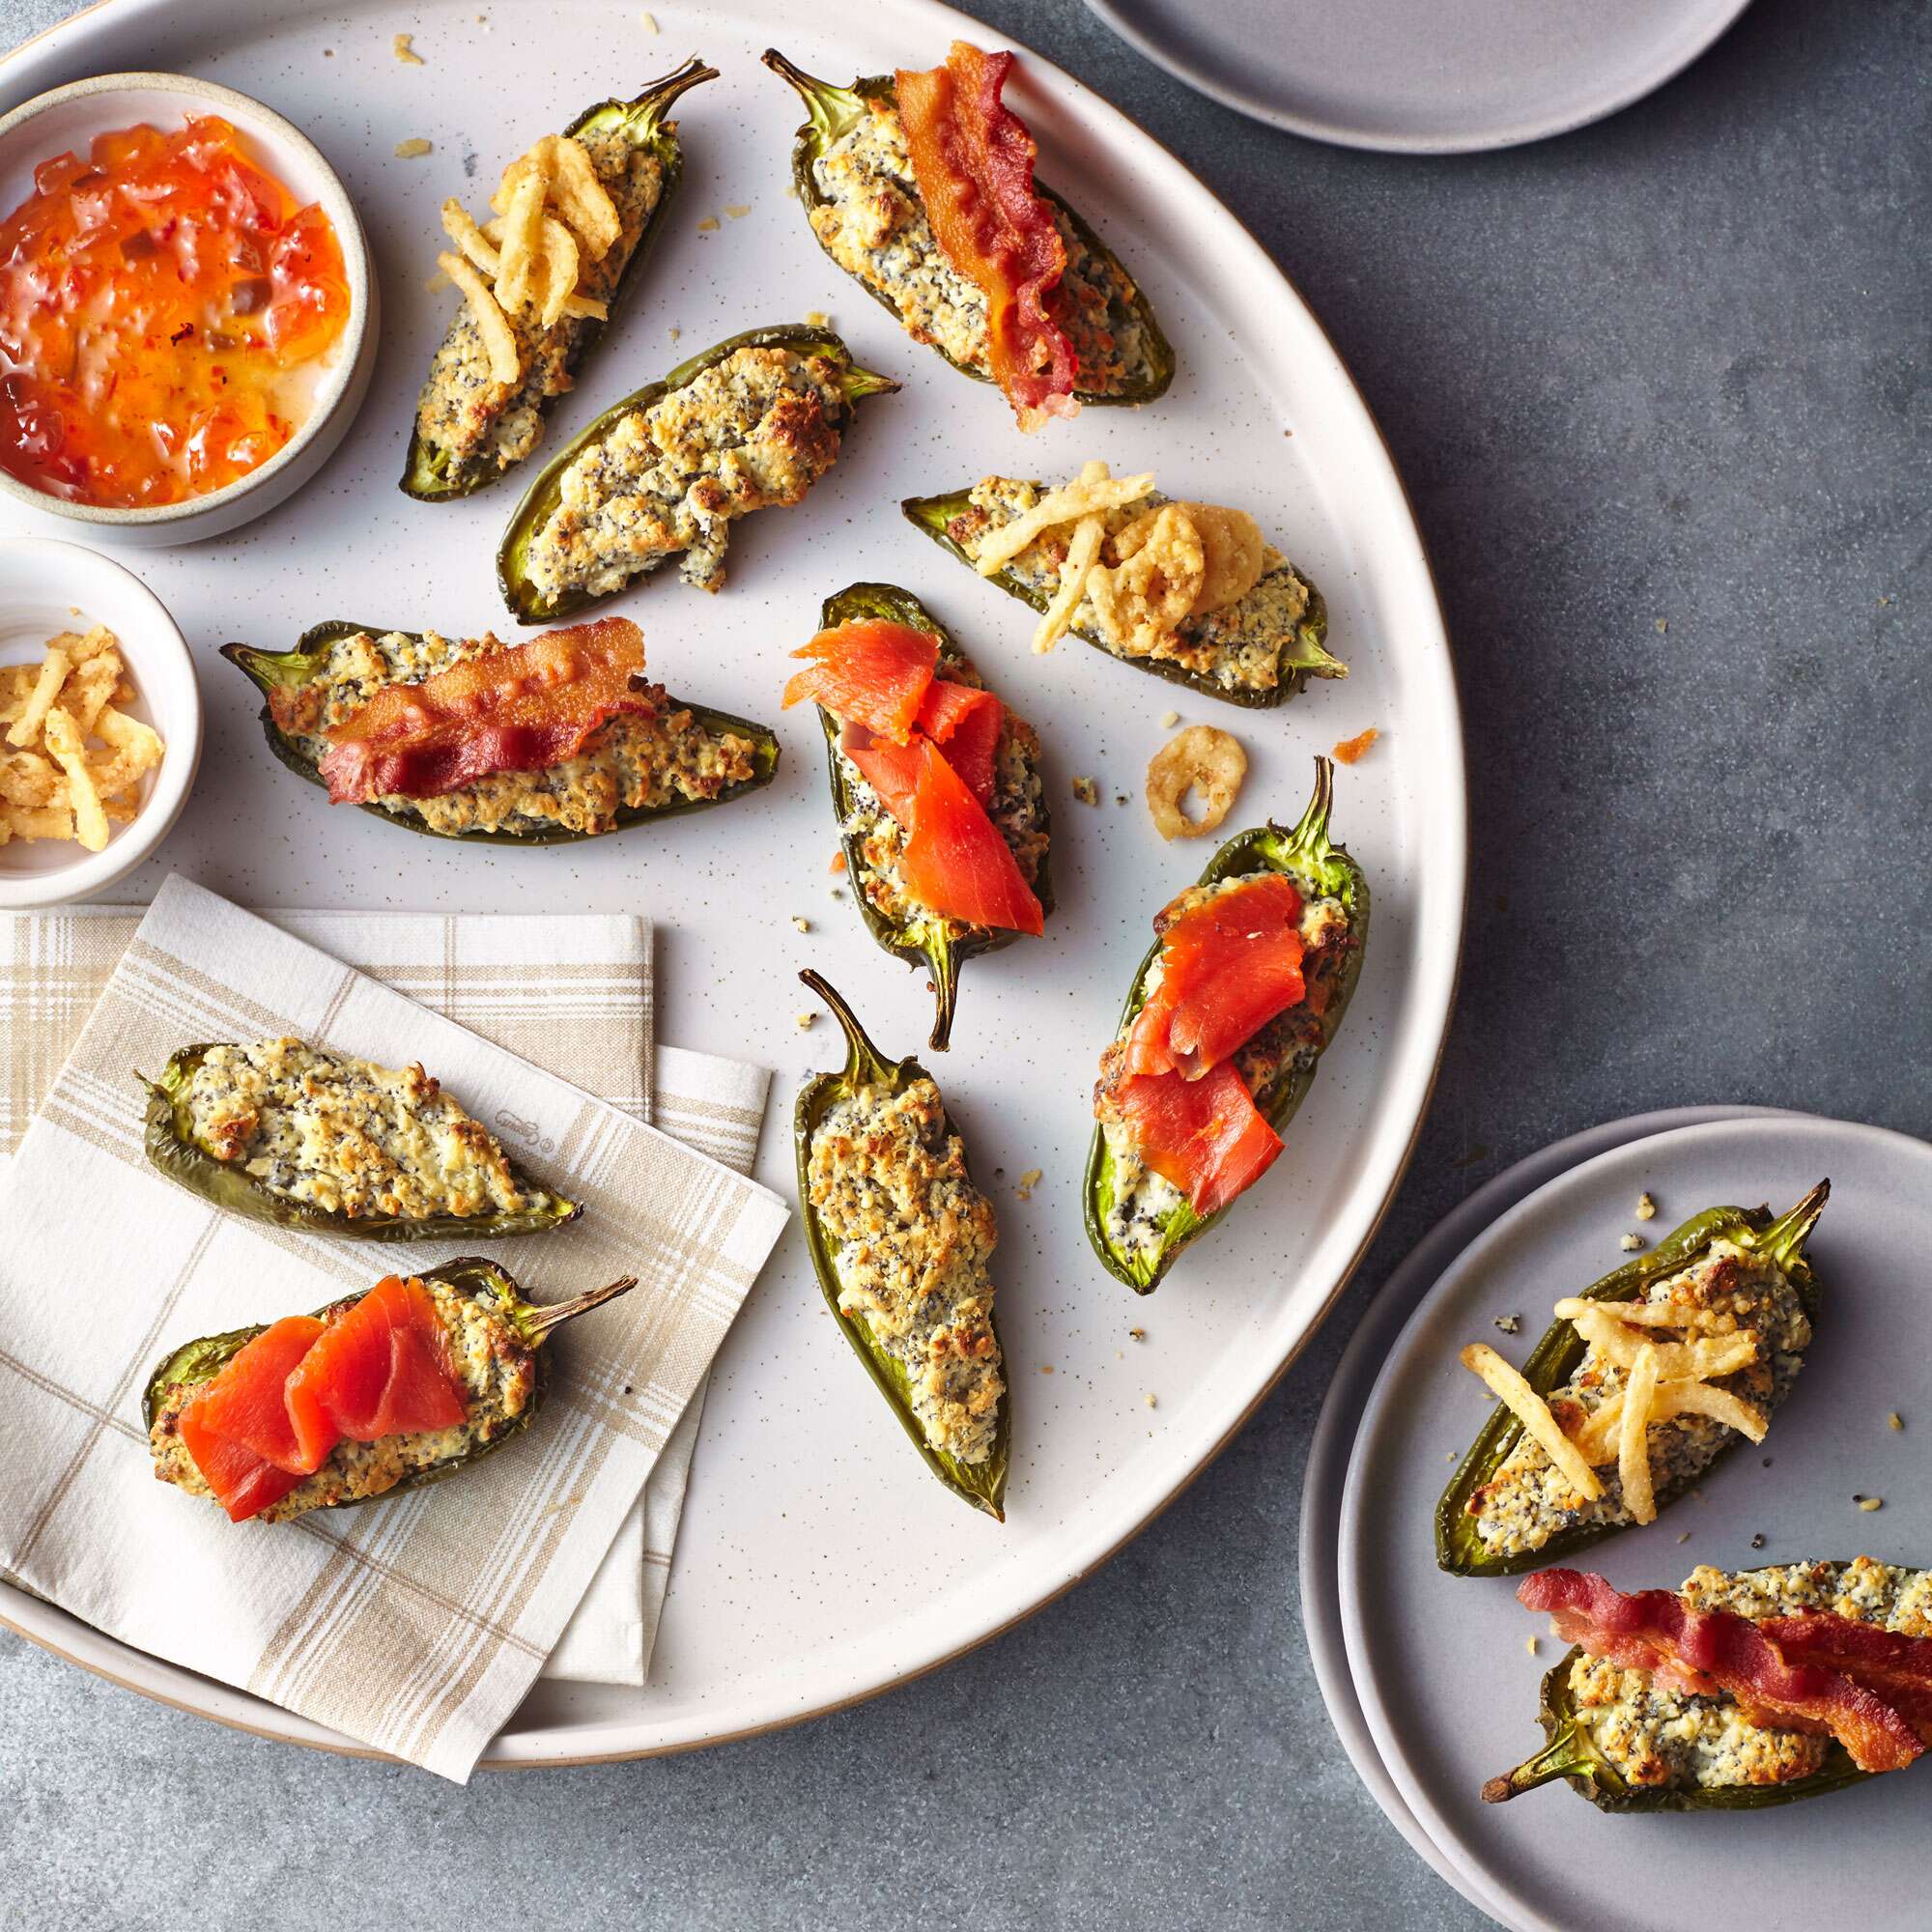 50 Hors d'Oeuvres Recipes Perfect for Your Next Party